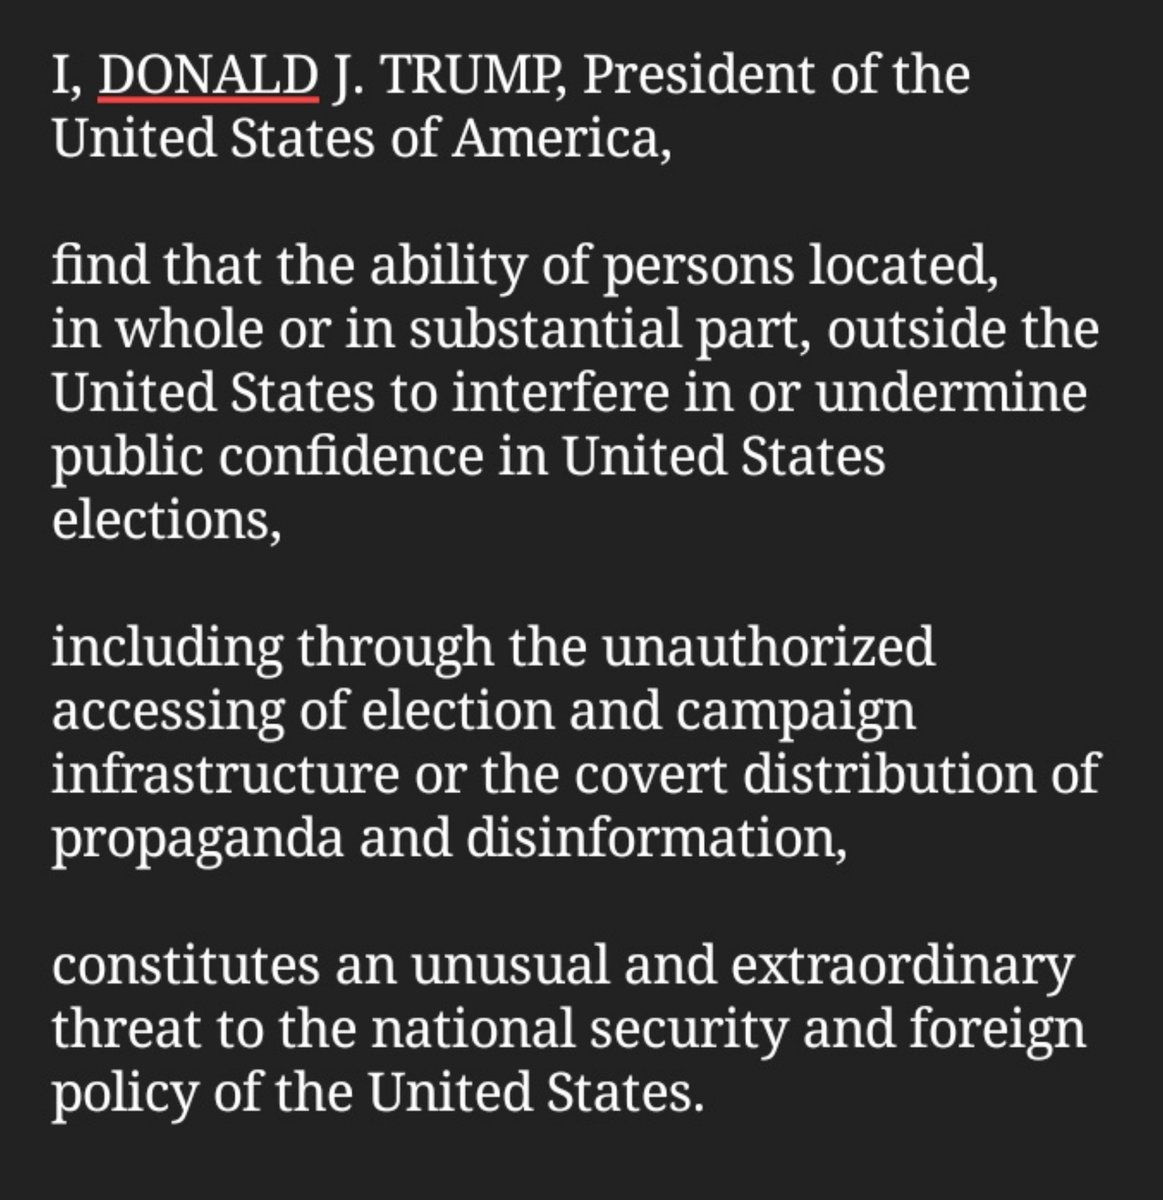 6) The 2018 Executive Order Could be activated at any time:Executive Order on Imposing Certain Sanctions in the Event of Foreign Interference in a United States ElectionIssued on: September 12, 2018 https://www.whitehouse.gov/presidential-actions/executive-order-imposing-certain-sanctions-event-foreign-interference-united-states-election/